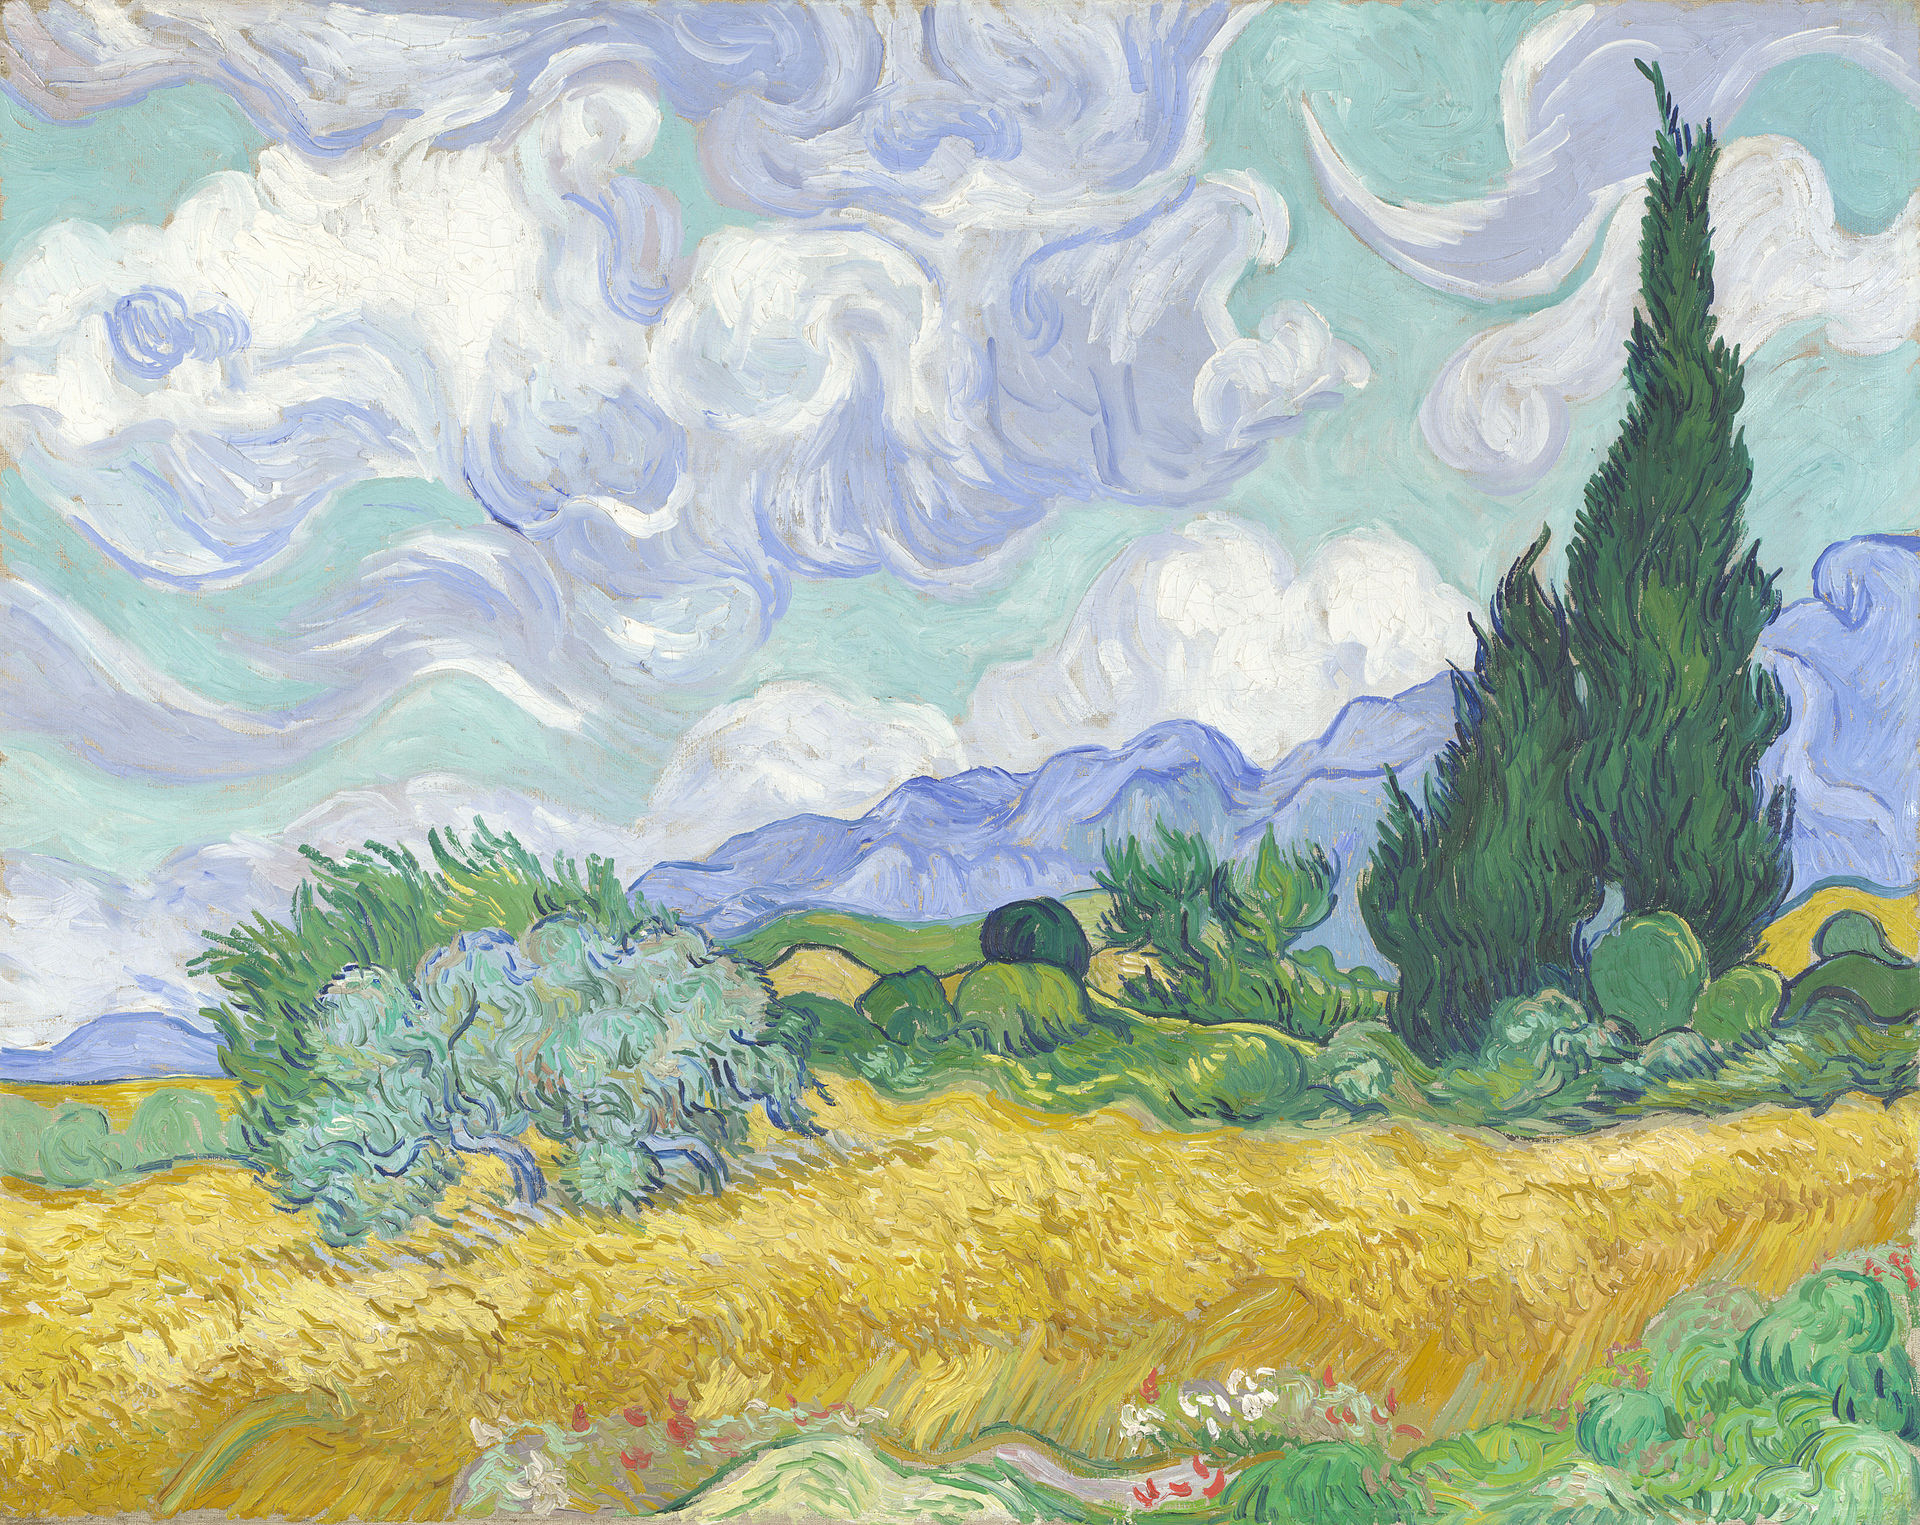  'A Wheat Field, With Cypresses' (1889), by Vincent van Gogh, will be in 'Van Gogh and Nature,' at the Clark Art Institute in June. National Gallery, London, courtesy of Wikimedia Commons.